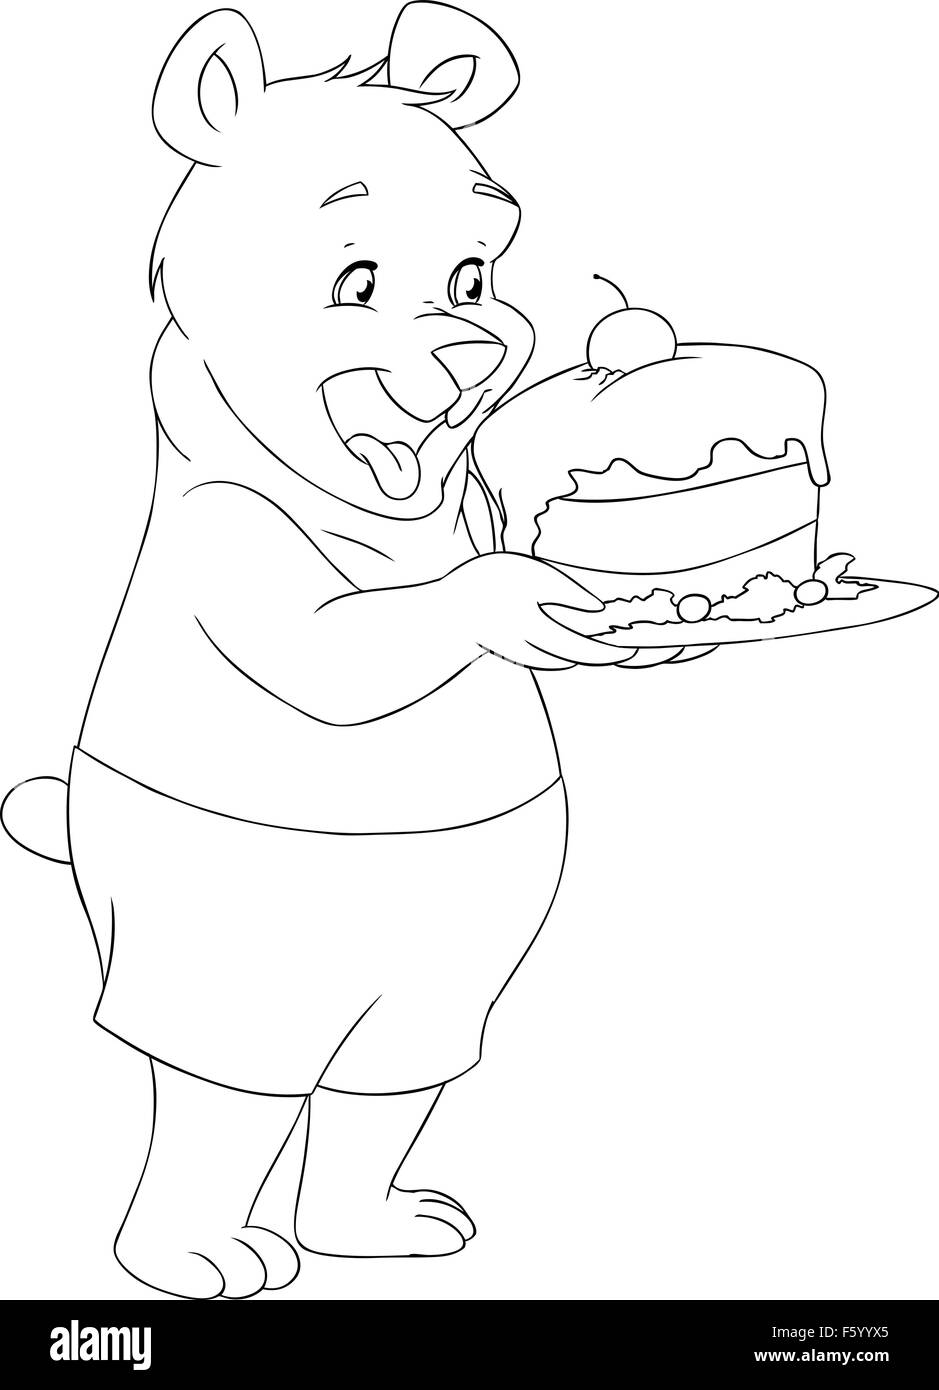 Vector illustration coloring page of a cute young bear holding a delicious cake. Stock Vector